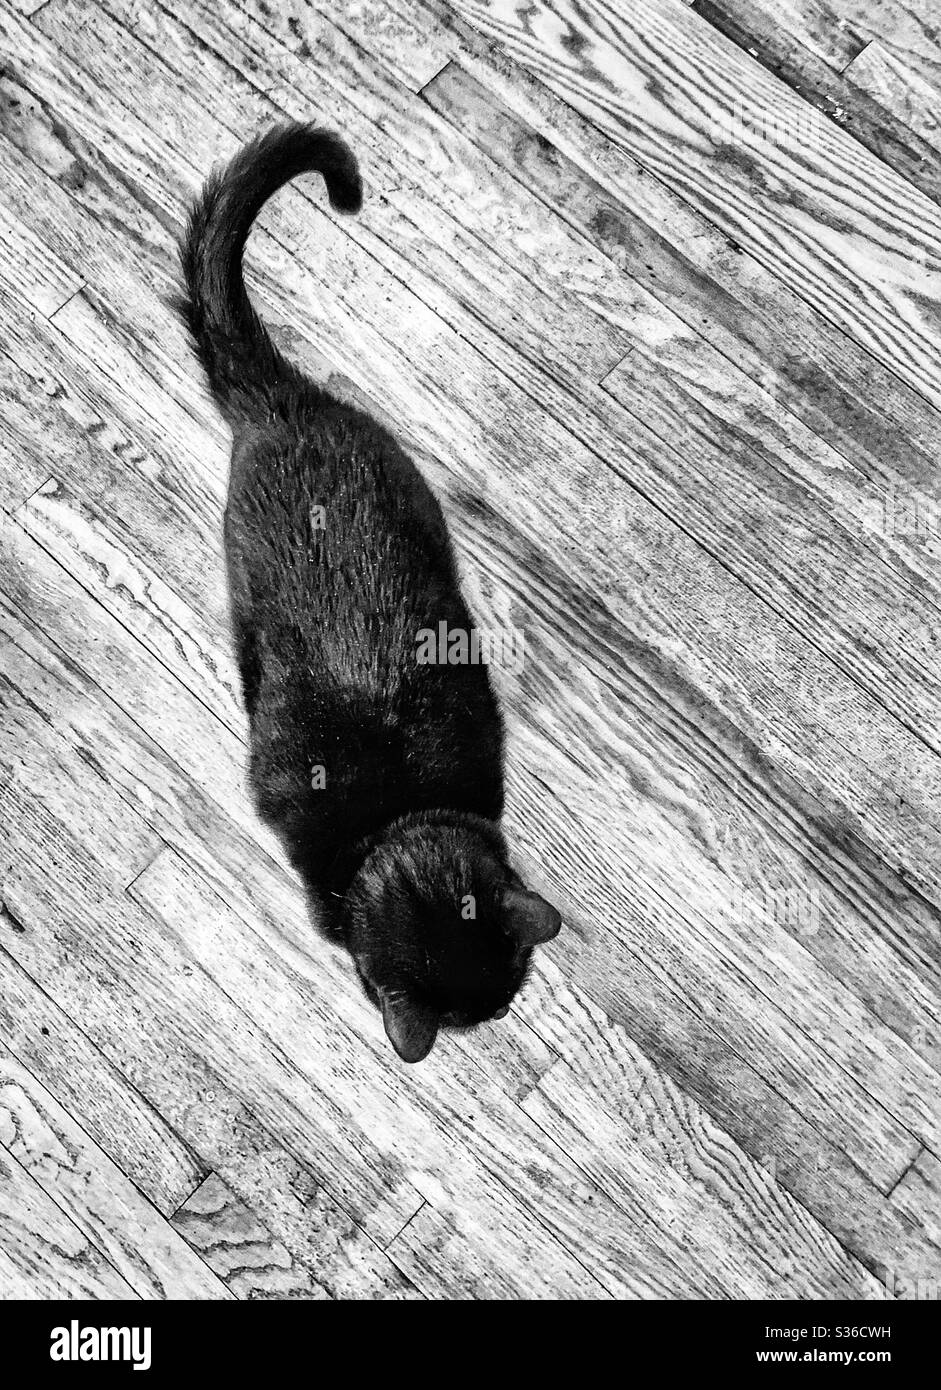 Black and white tip view of black cat on wooden floor Stock Photo